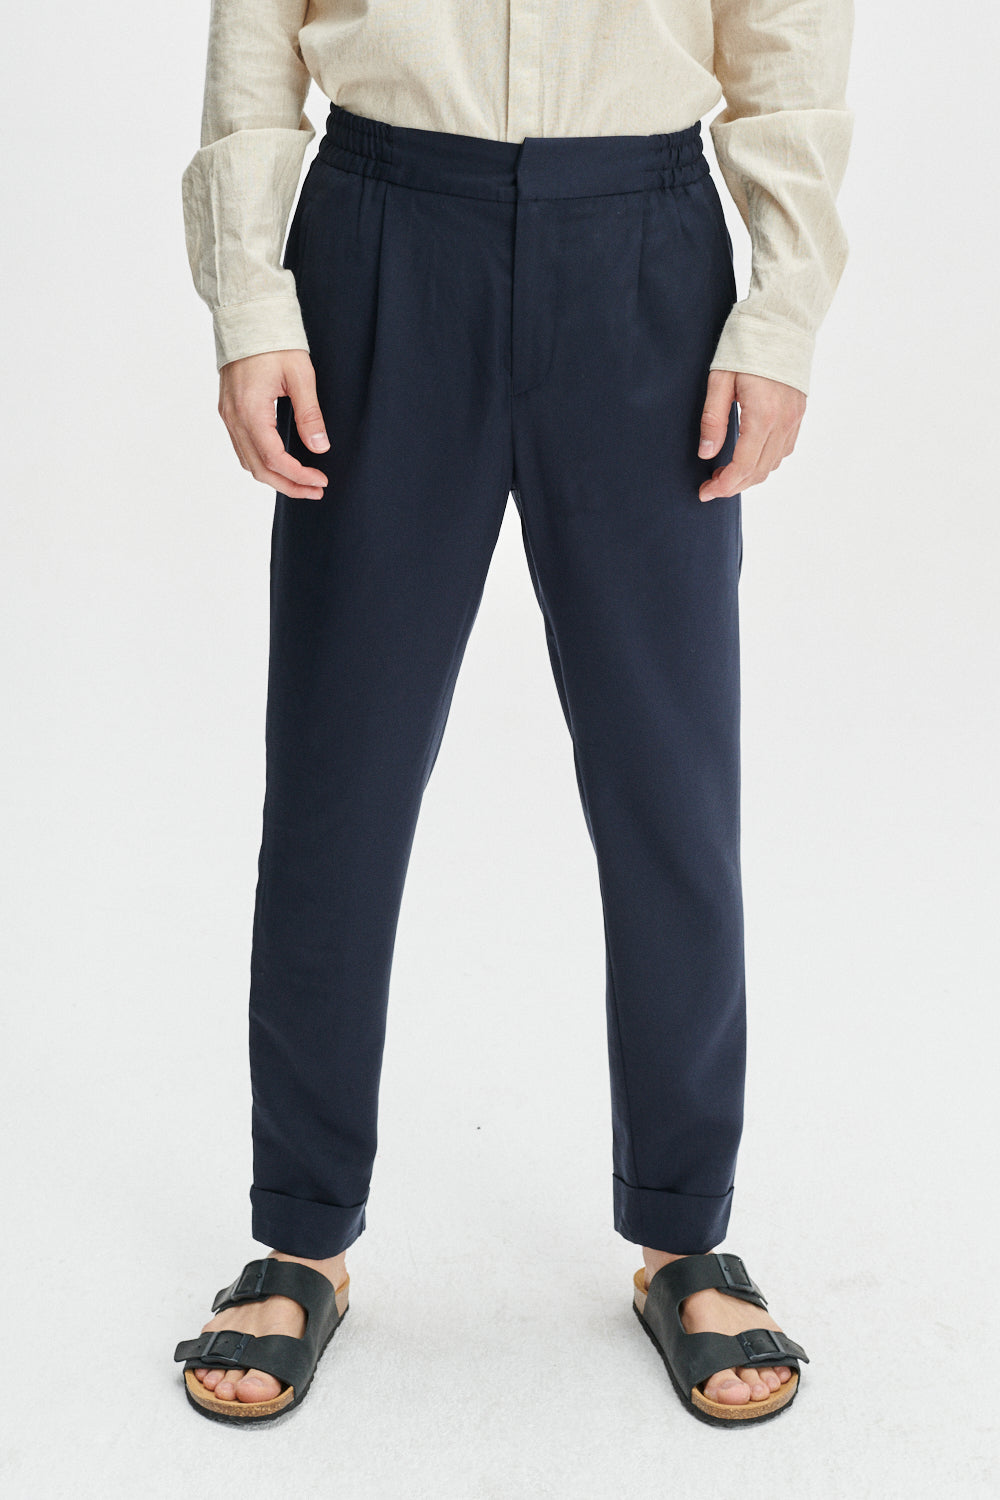 Garden Trousers in a Navy Blue Sustainable Smooth and Soft High End Italian Lyocell by Albini